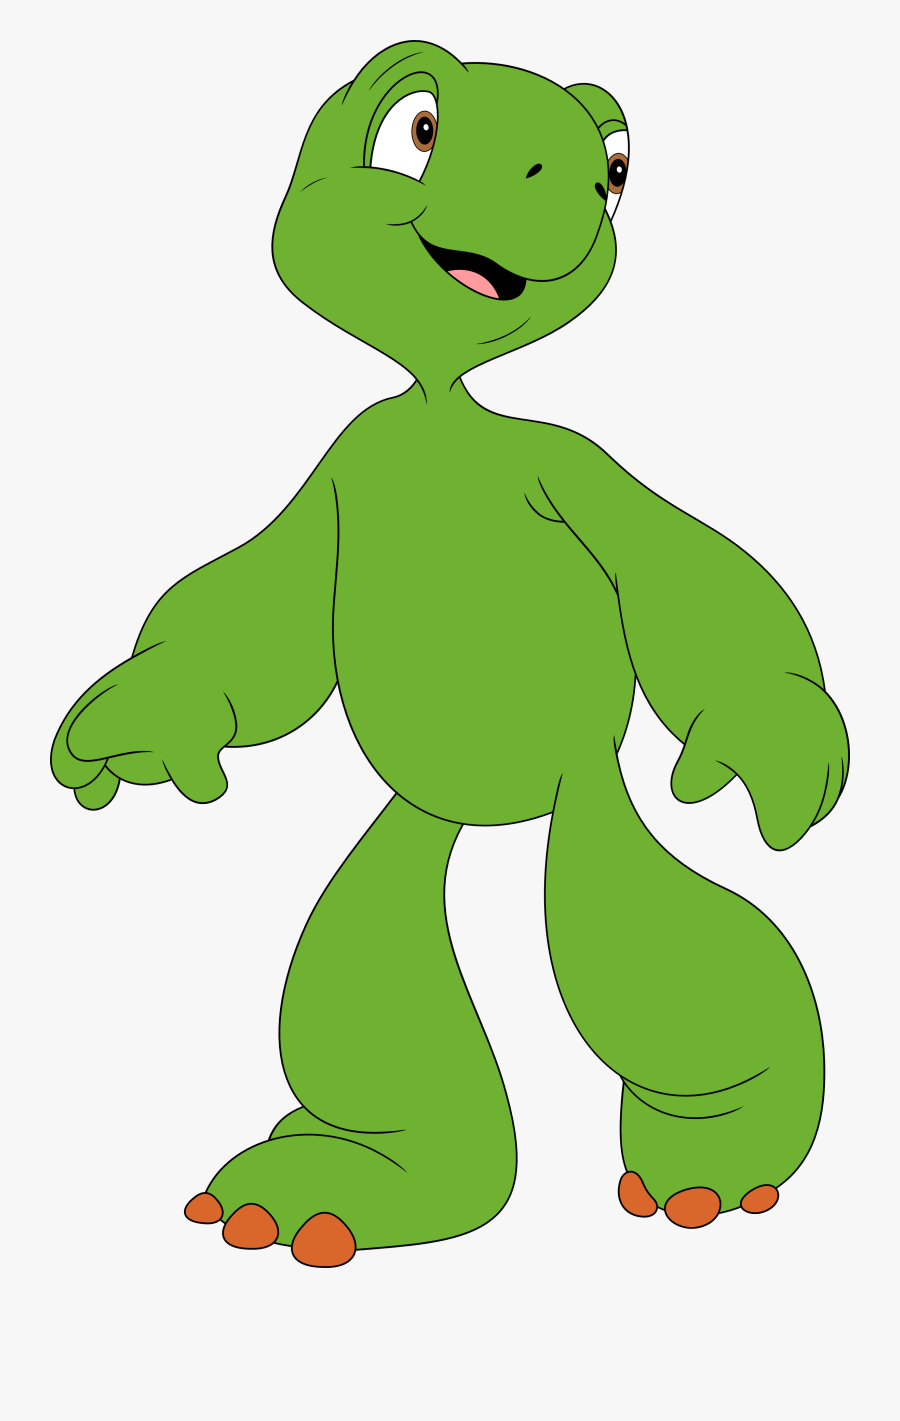 Franklin Is Naked Again By Porygon2z - Franklin The Turtle Without His Shell, Transparent Clipart